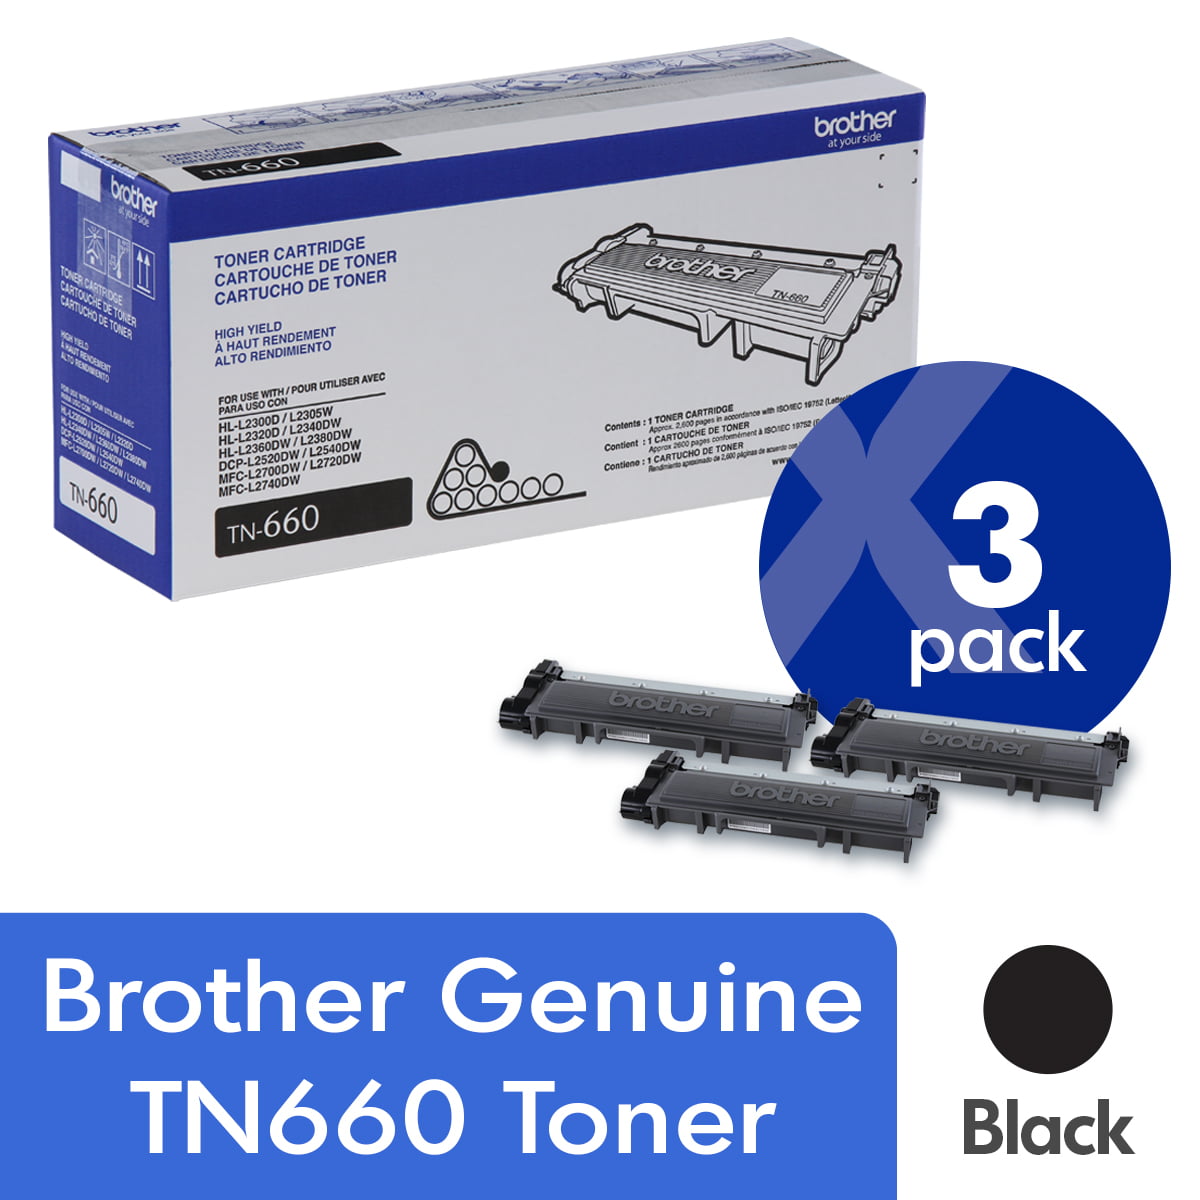 Brother Genuine High Yield Toner Cartridge, TN760, Page Yield Up 